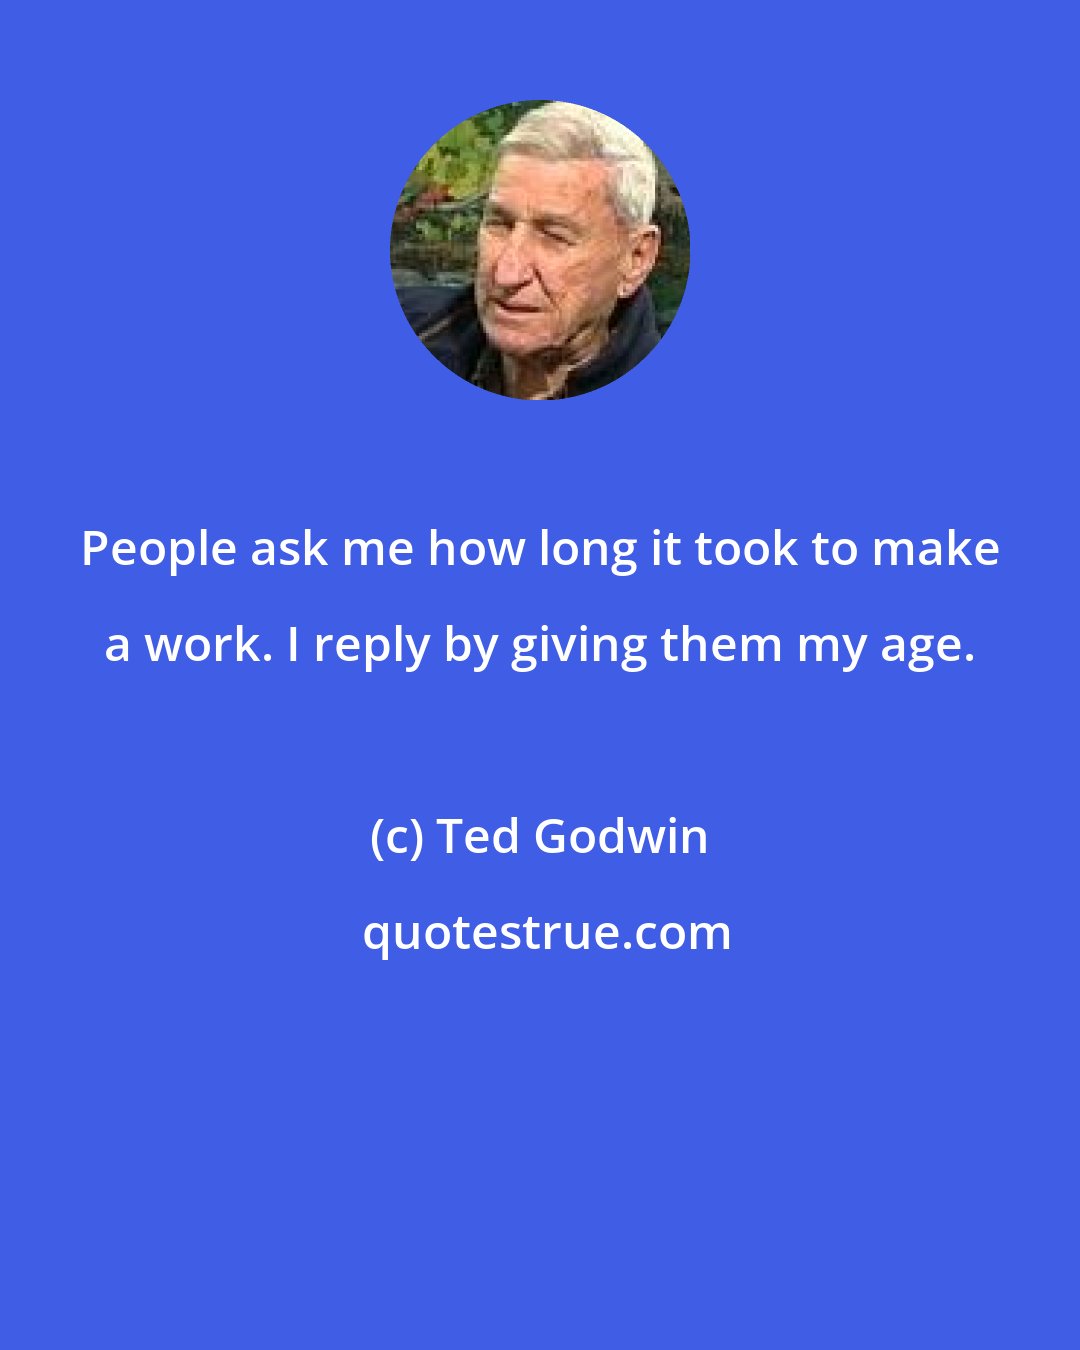 Ted Godwin: People ask me how long it took to make a work. I reply by giving them my age.